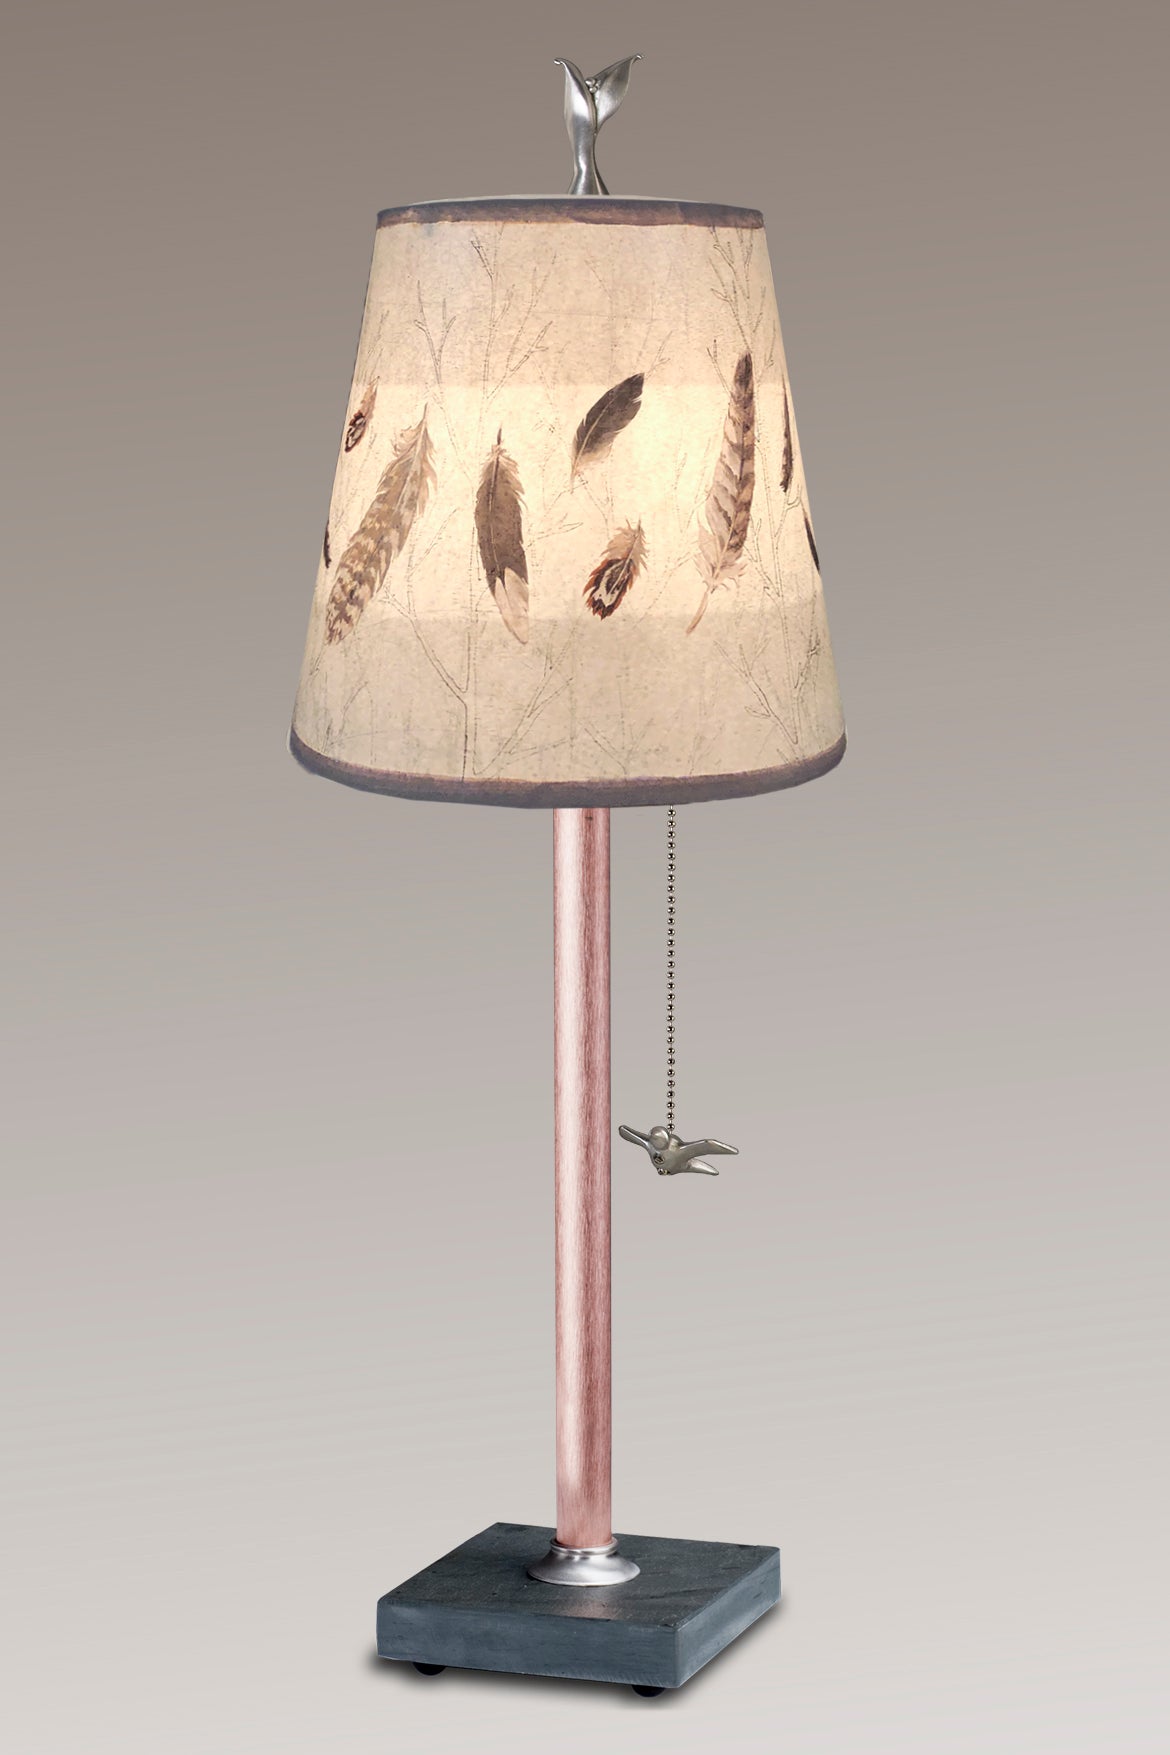 Copper Table Lamp with Small Drum in Feathers in Pebble